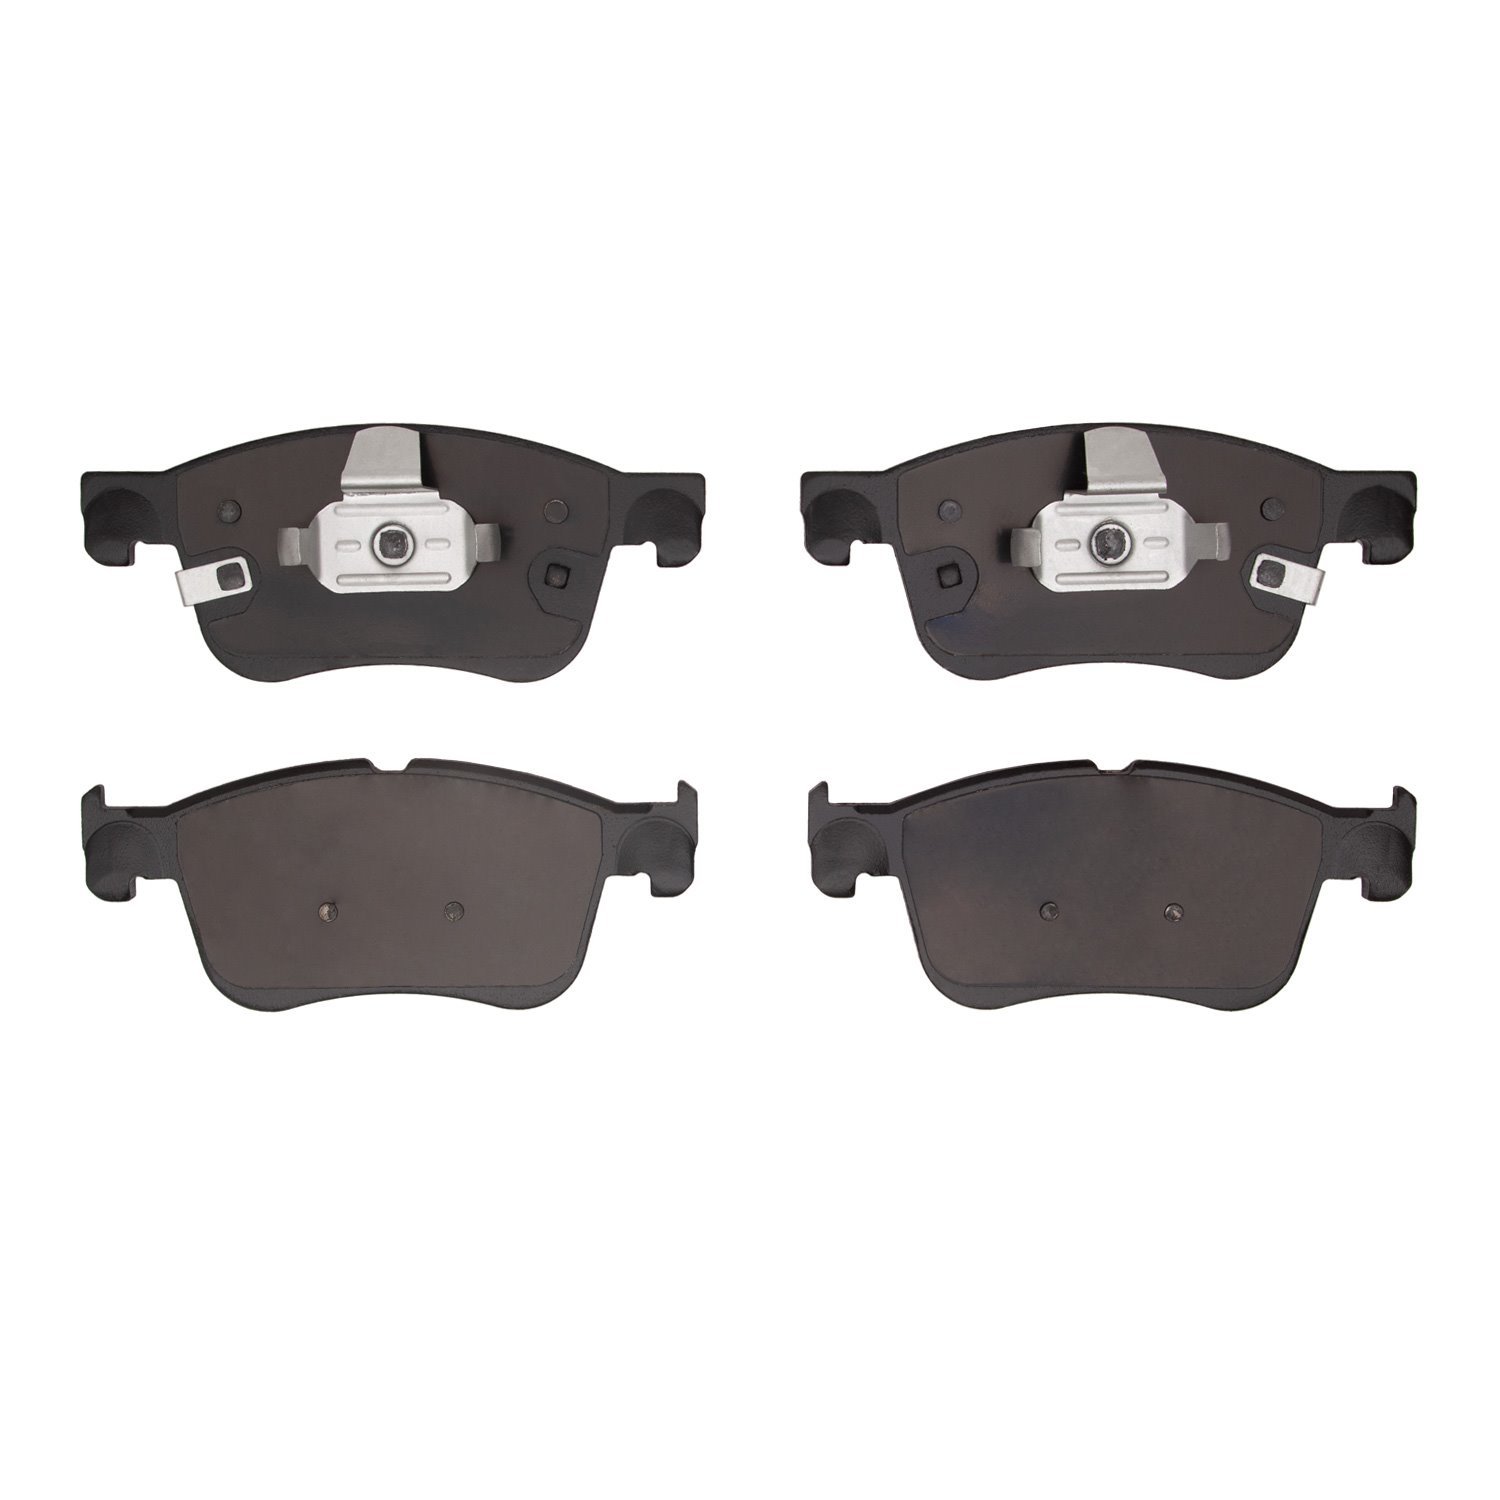 1400-2300-00 Ultimate-Duty Brake Pads Kit, Fits Select Ford/Lincoln/Mercury/Mazda, Position: Front